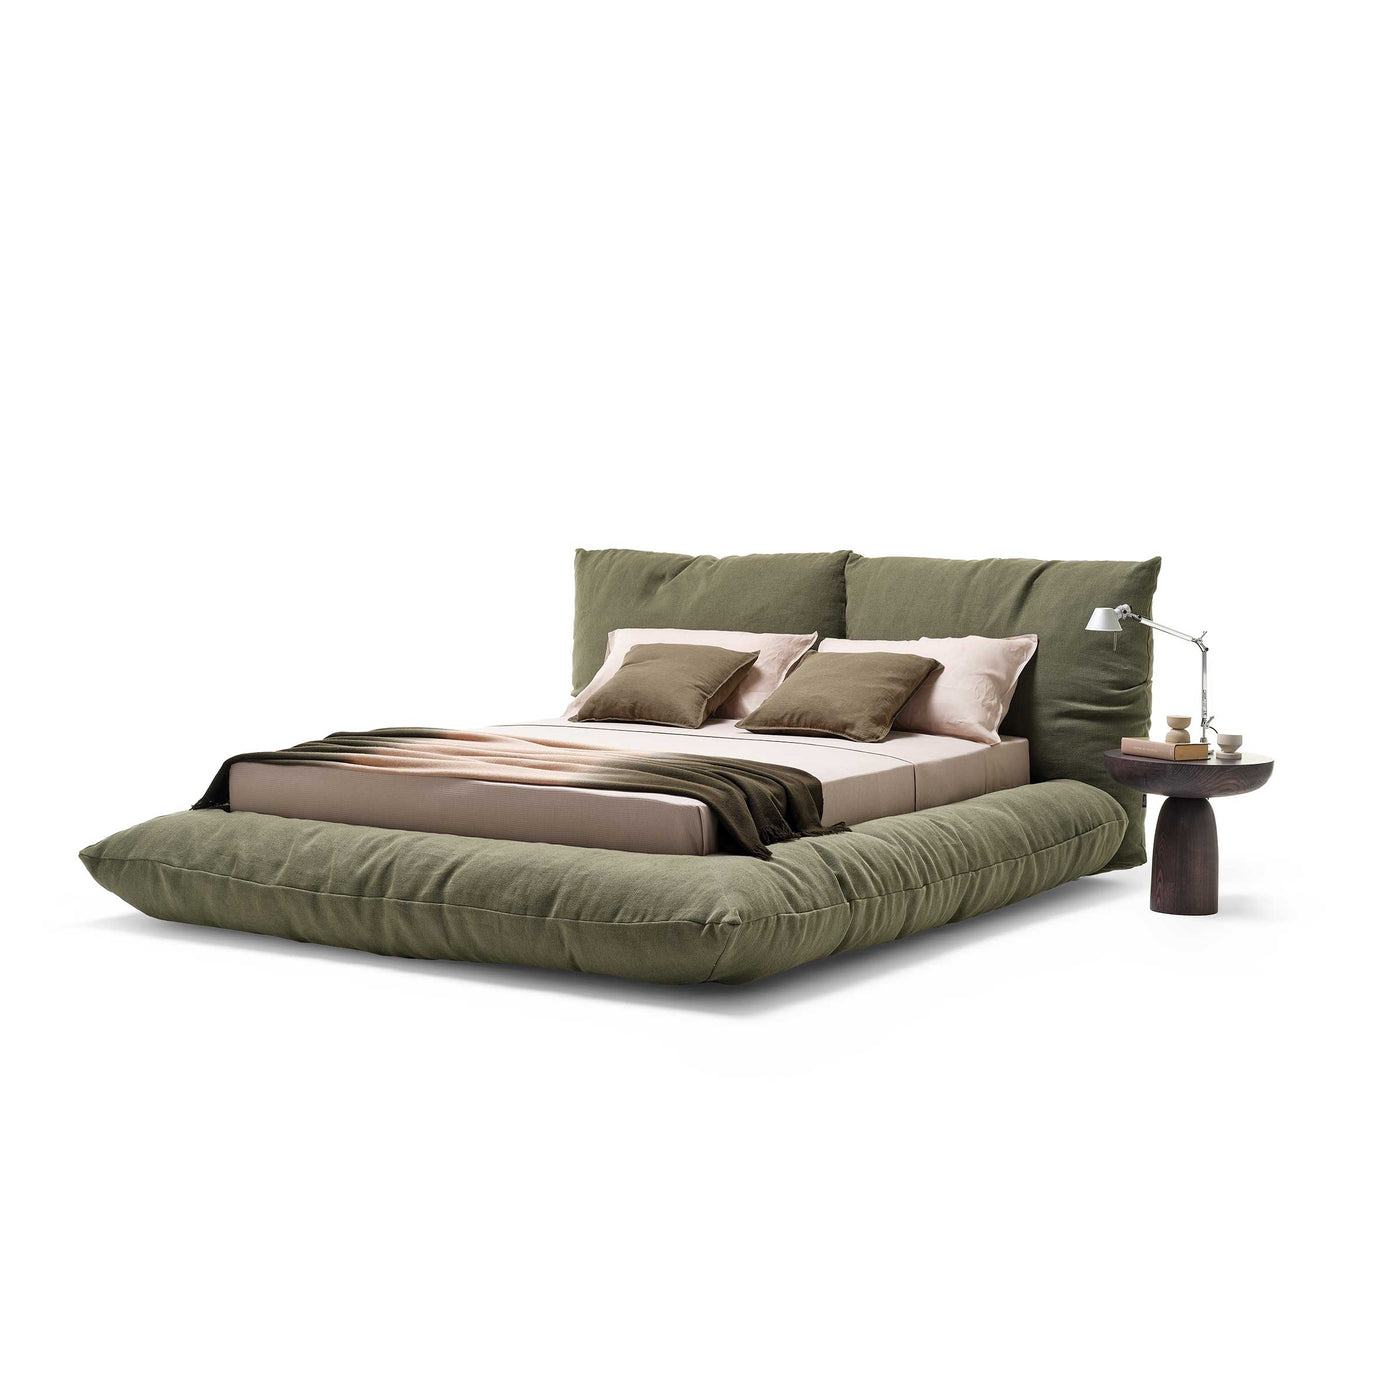 Upholstered Double Bed ALBA by StudioNove.3 for Mogg 03